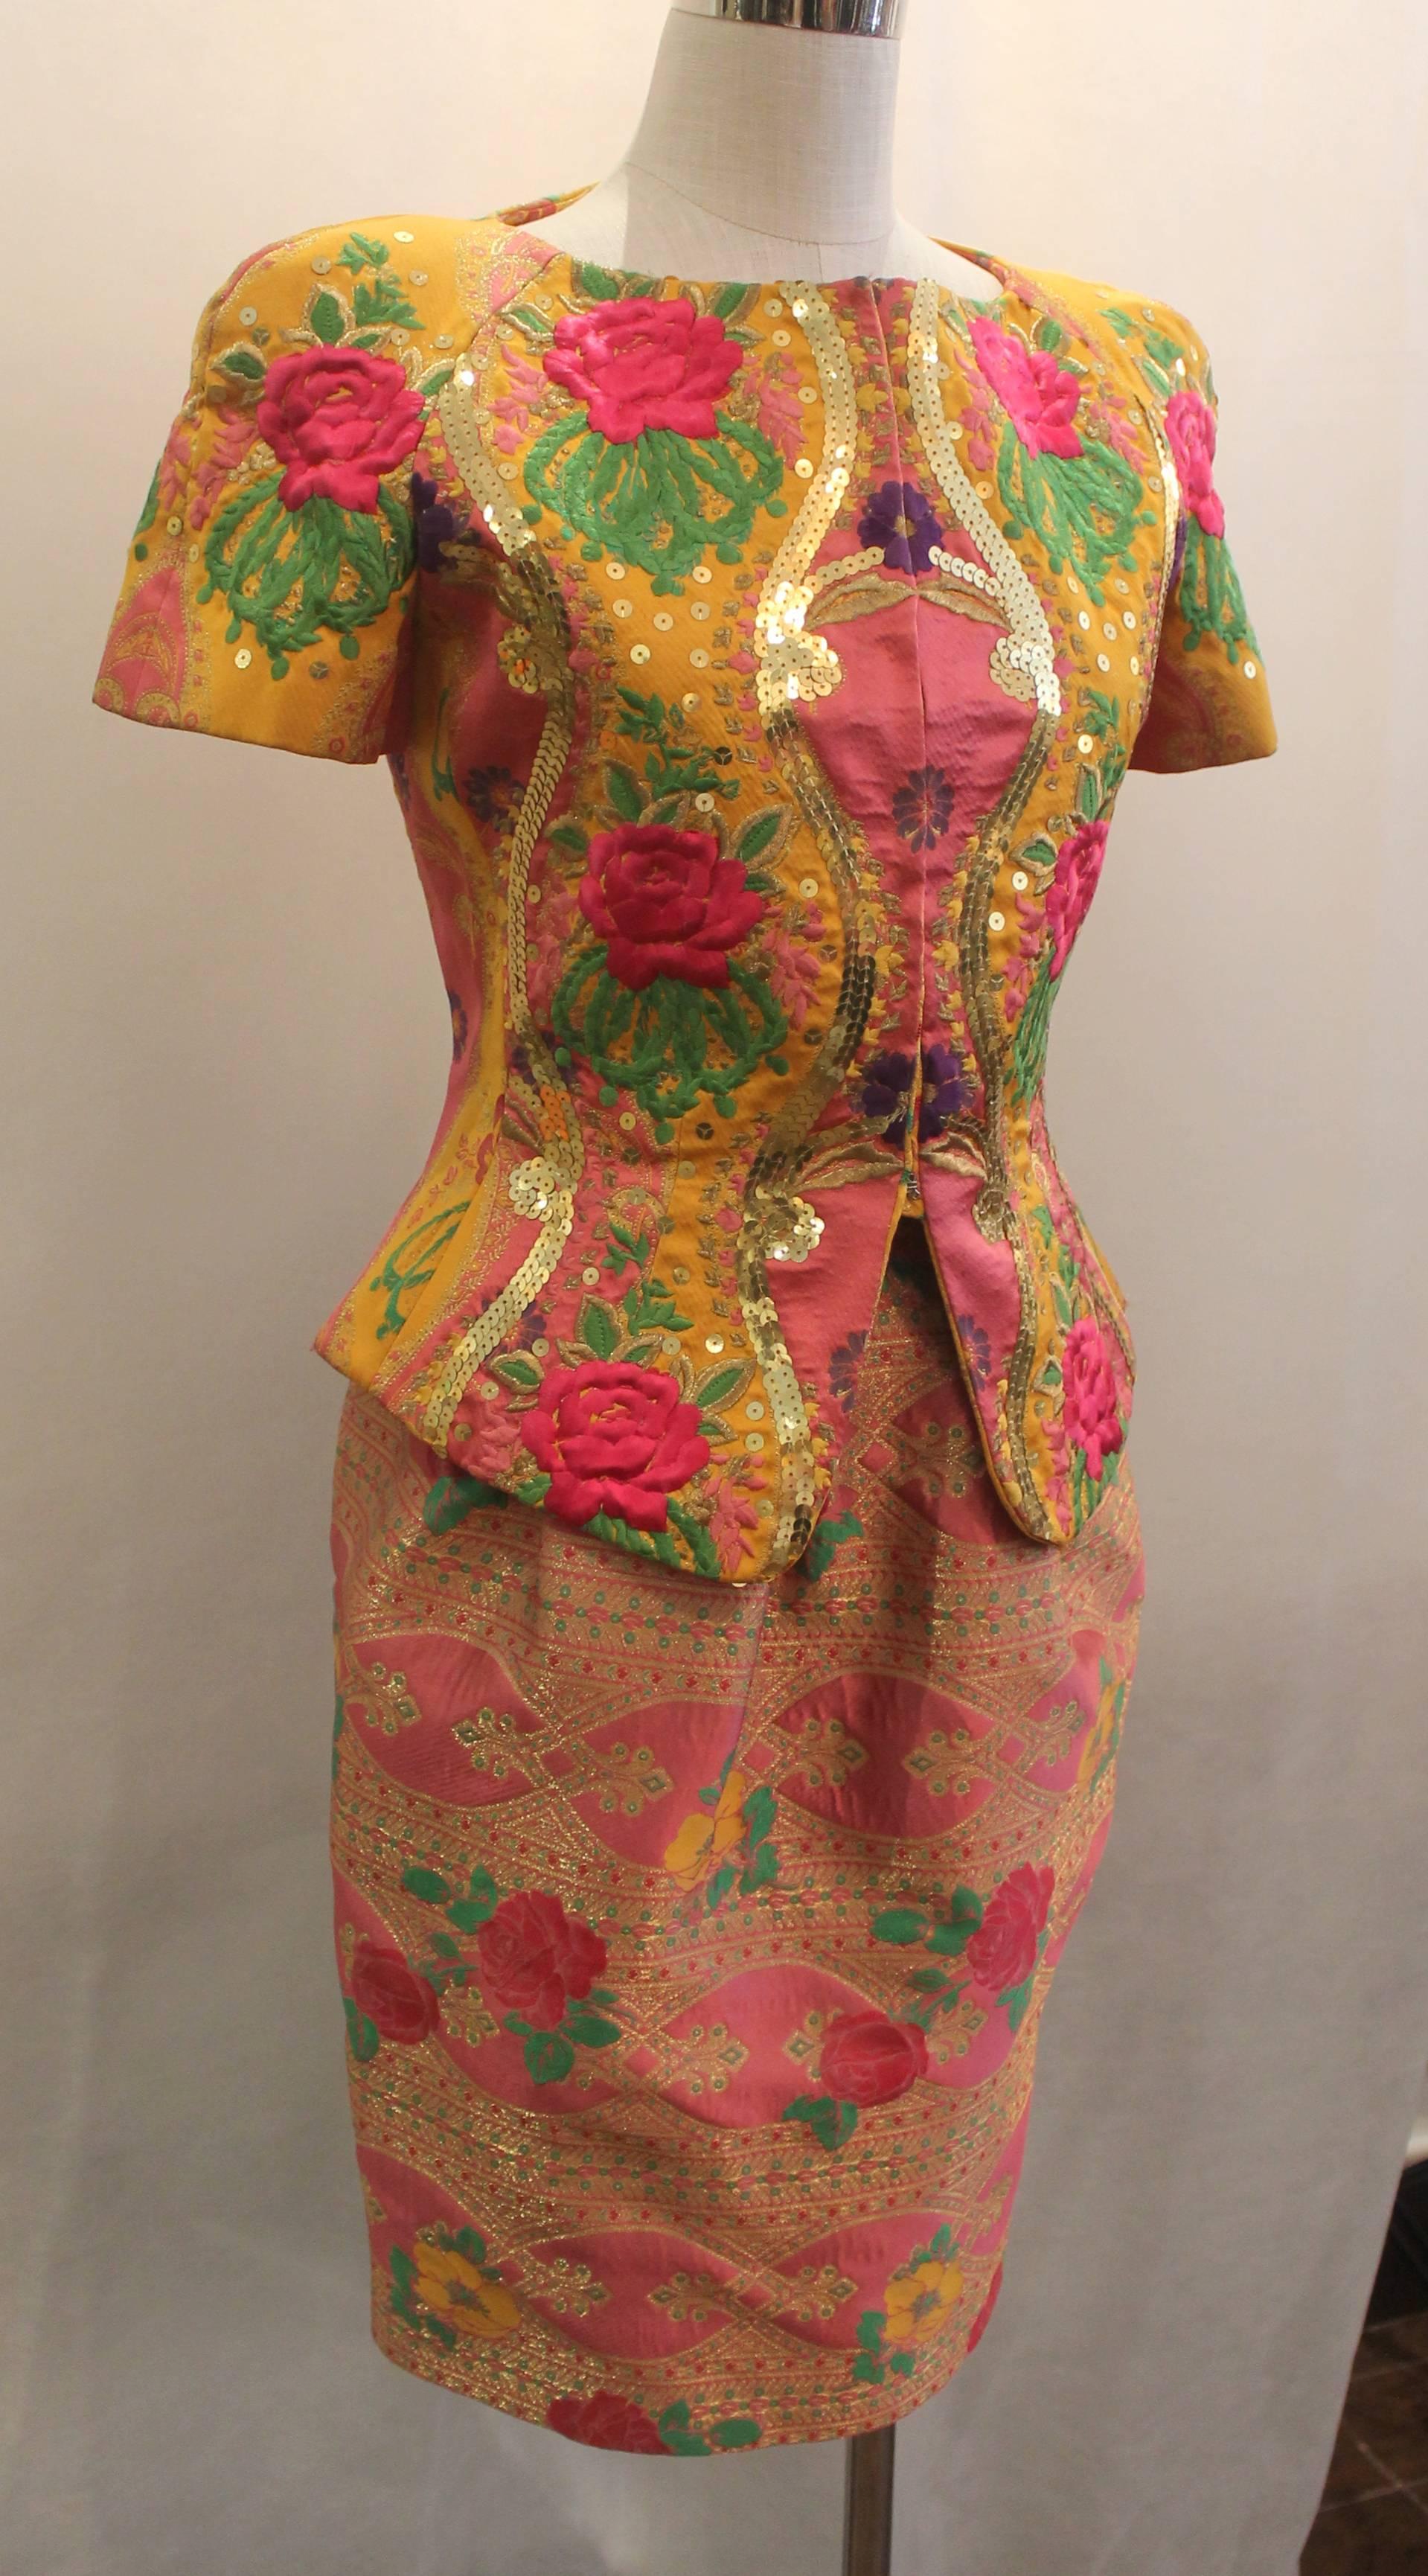 Christian LaCroix Vintage Multi-Color Silk Embroidered Floral Skirt Suit - 1990's. This skirt suit is in excellent condition and is a very unique piece. The suit has a pink background with gold & green designs and sequins on the top. The top is